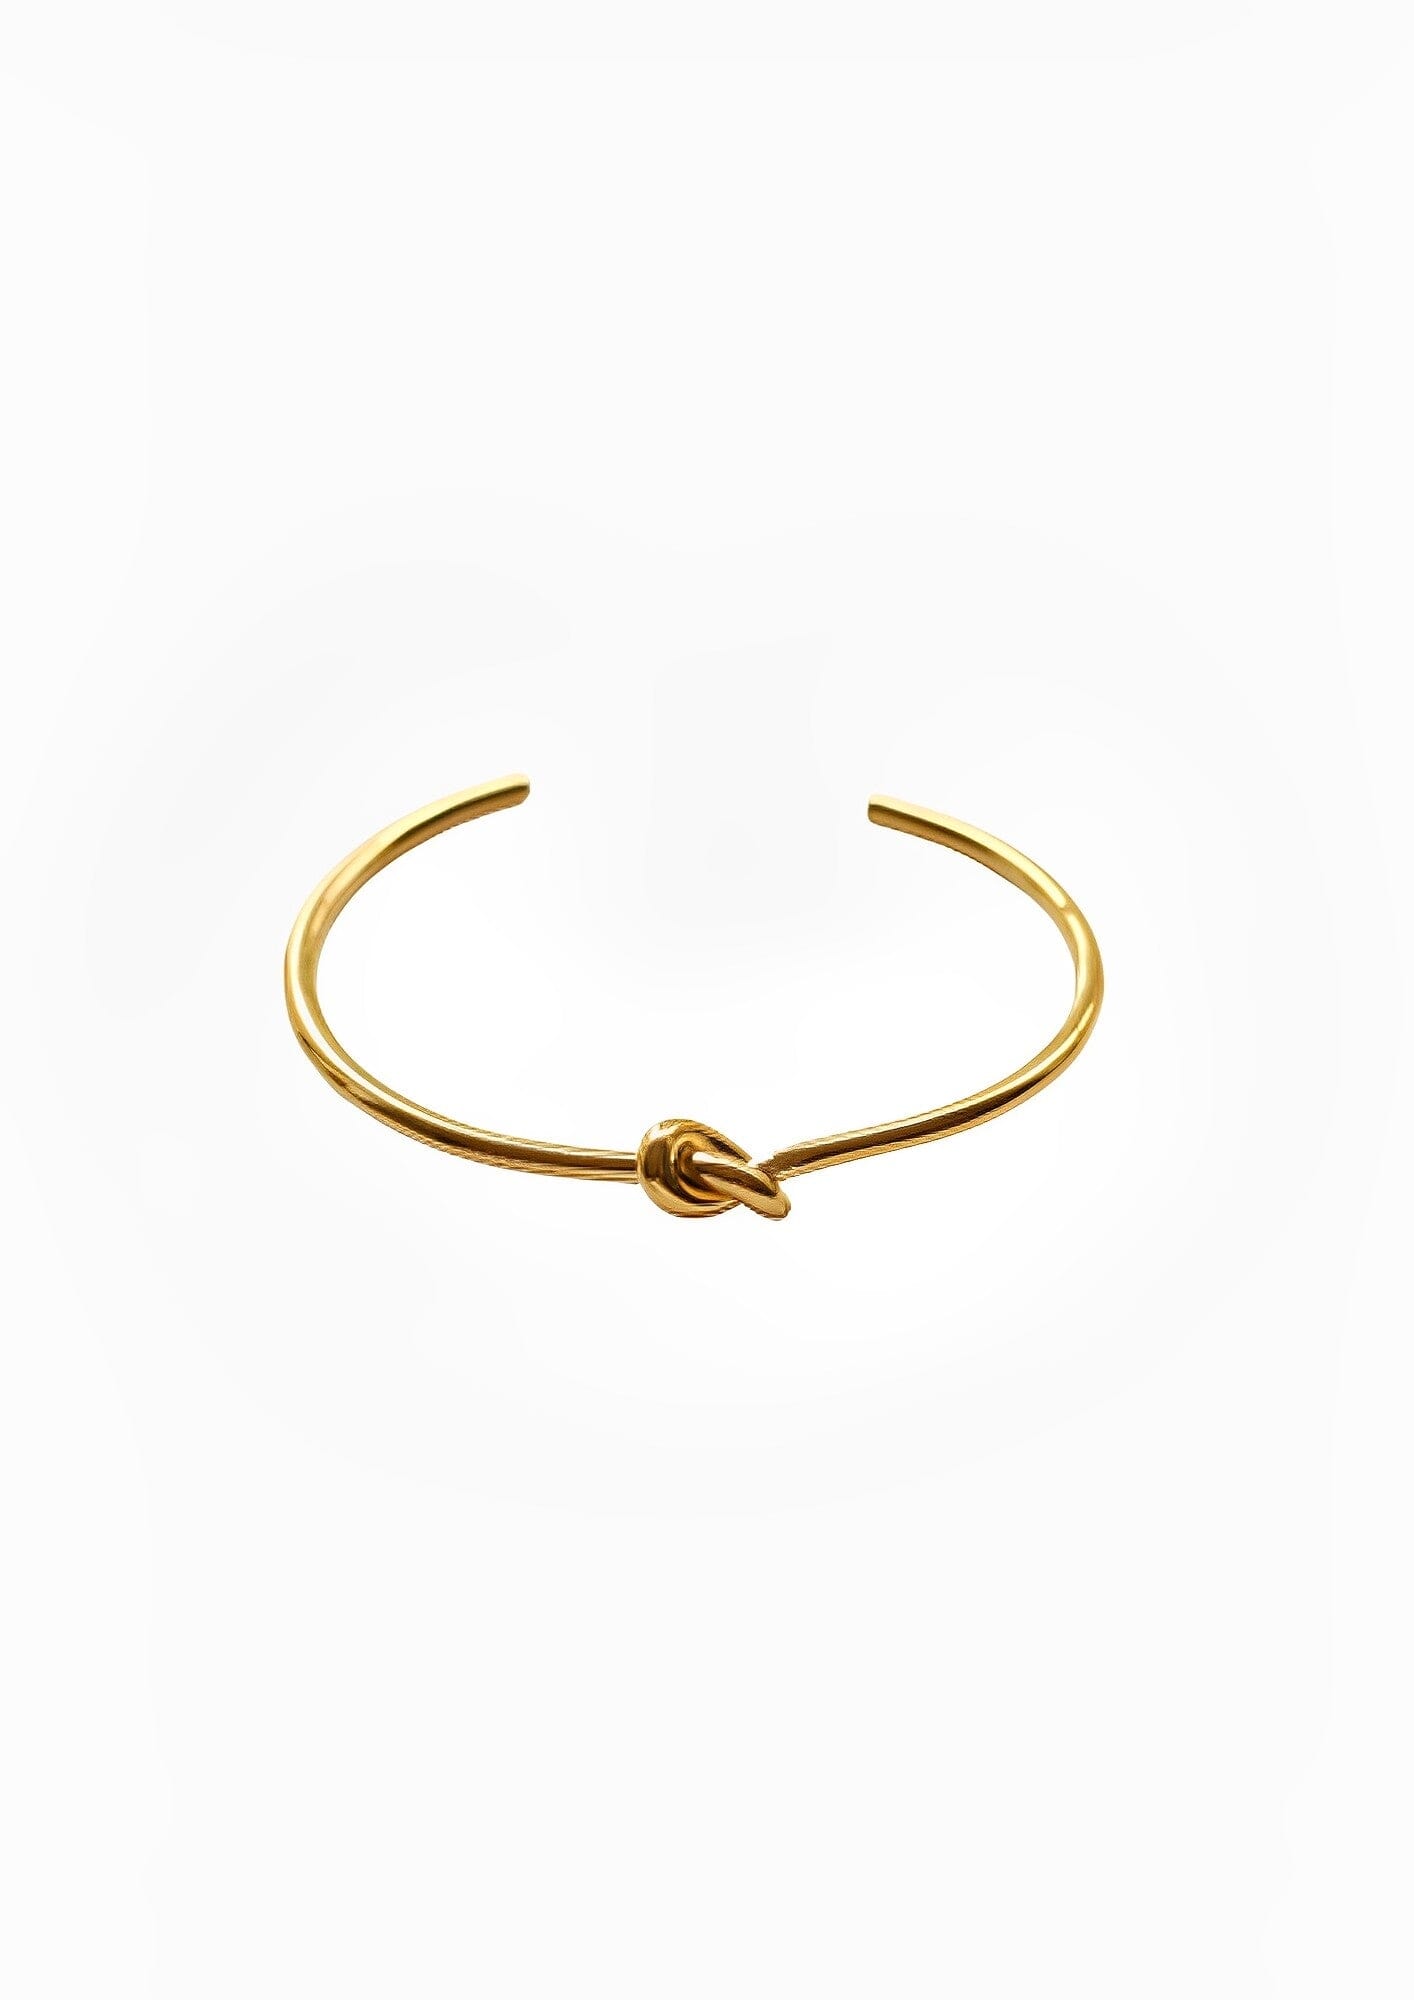 KNOT BRACELET braclet Yubama Jewelry Online Store - The Elegant Designs of Gold and Silver ! 